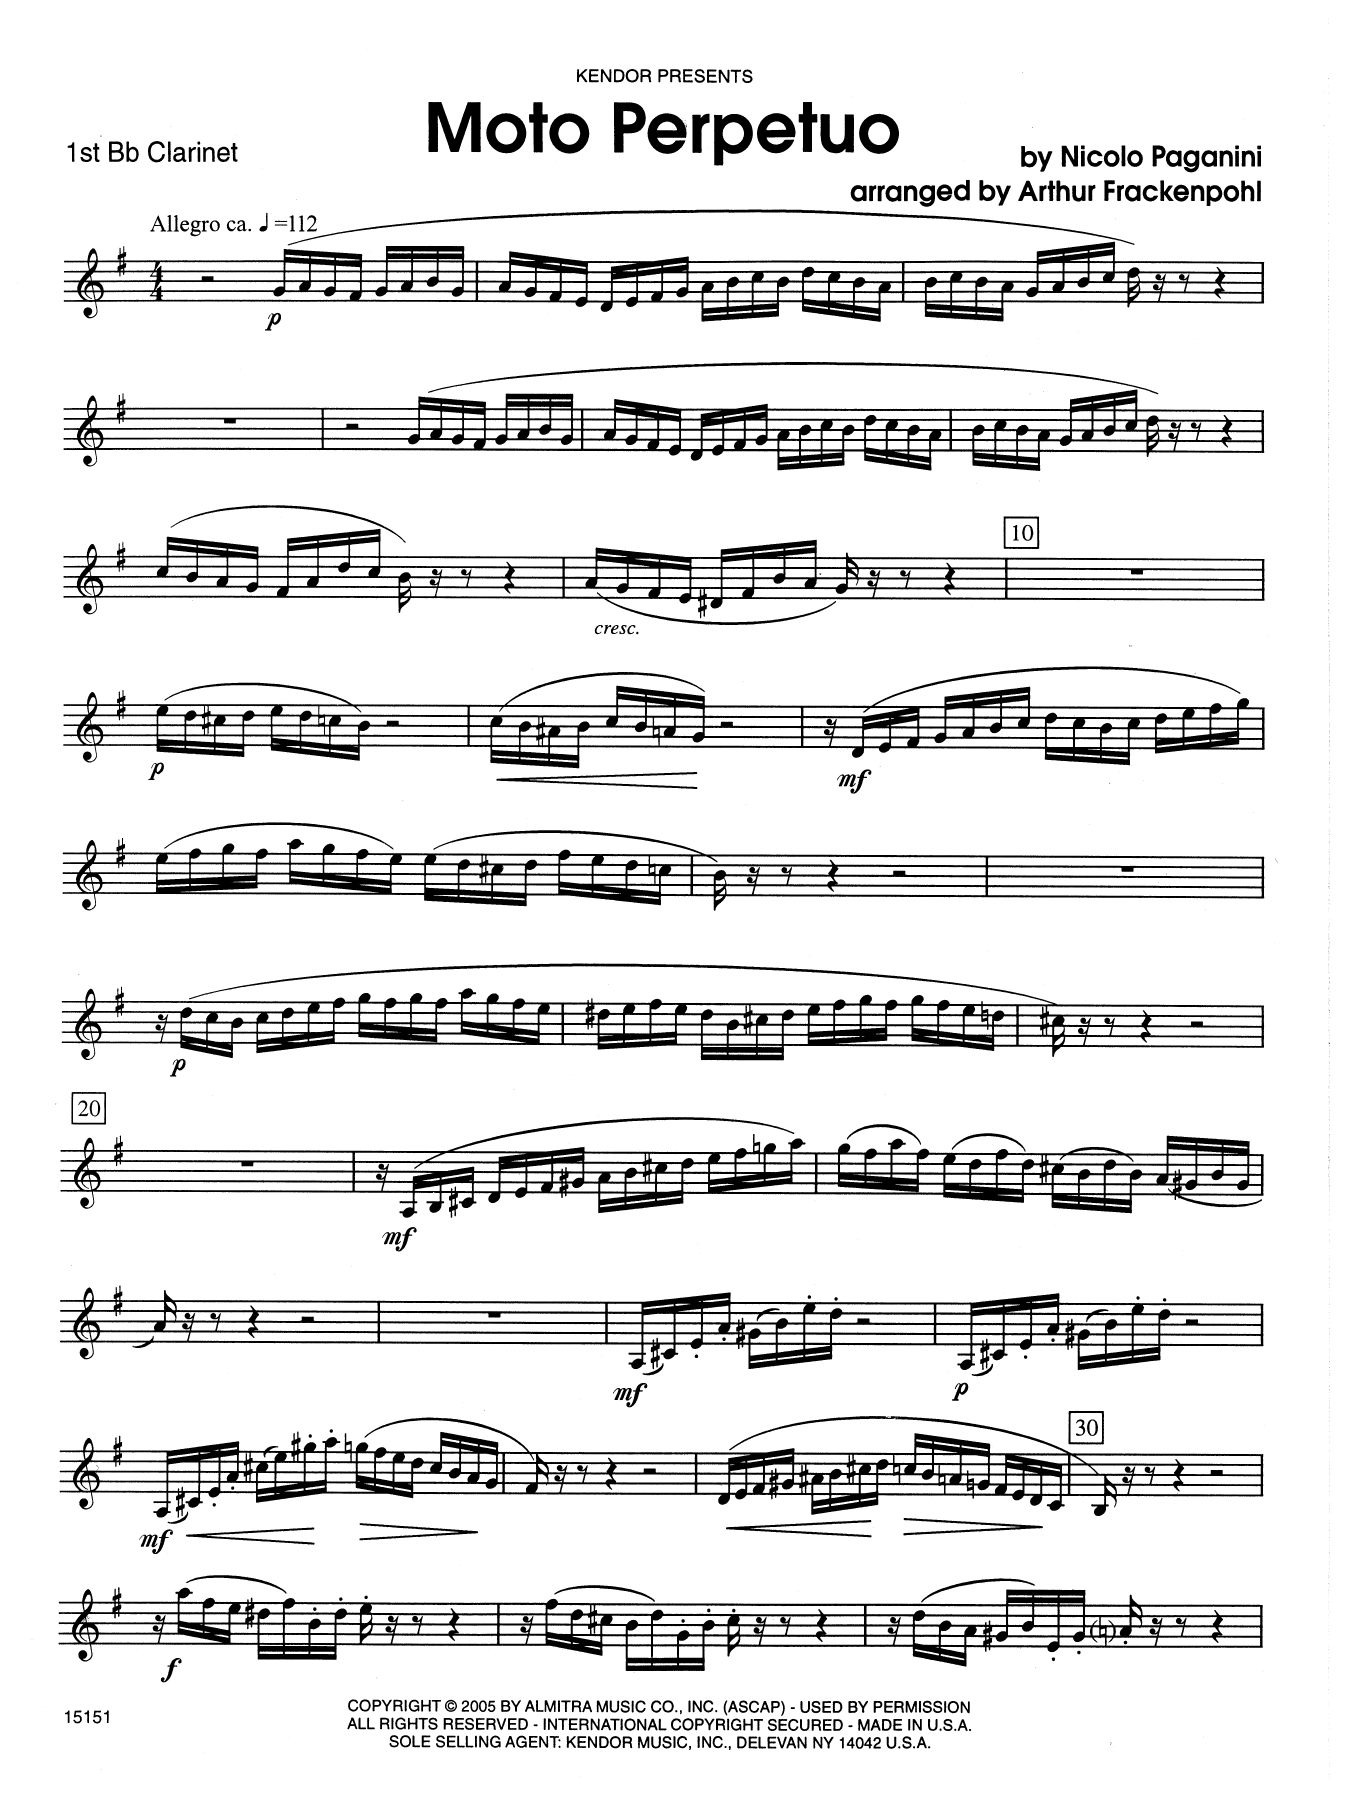 Arthur Frackenpohl Moto Perpetuo - 1st Bb Clarinet sheet music notes and chords. Download Printable PDF.